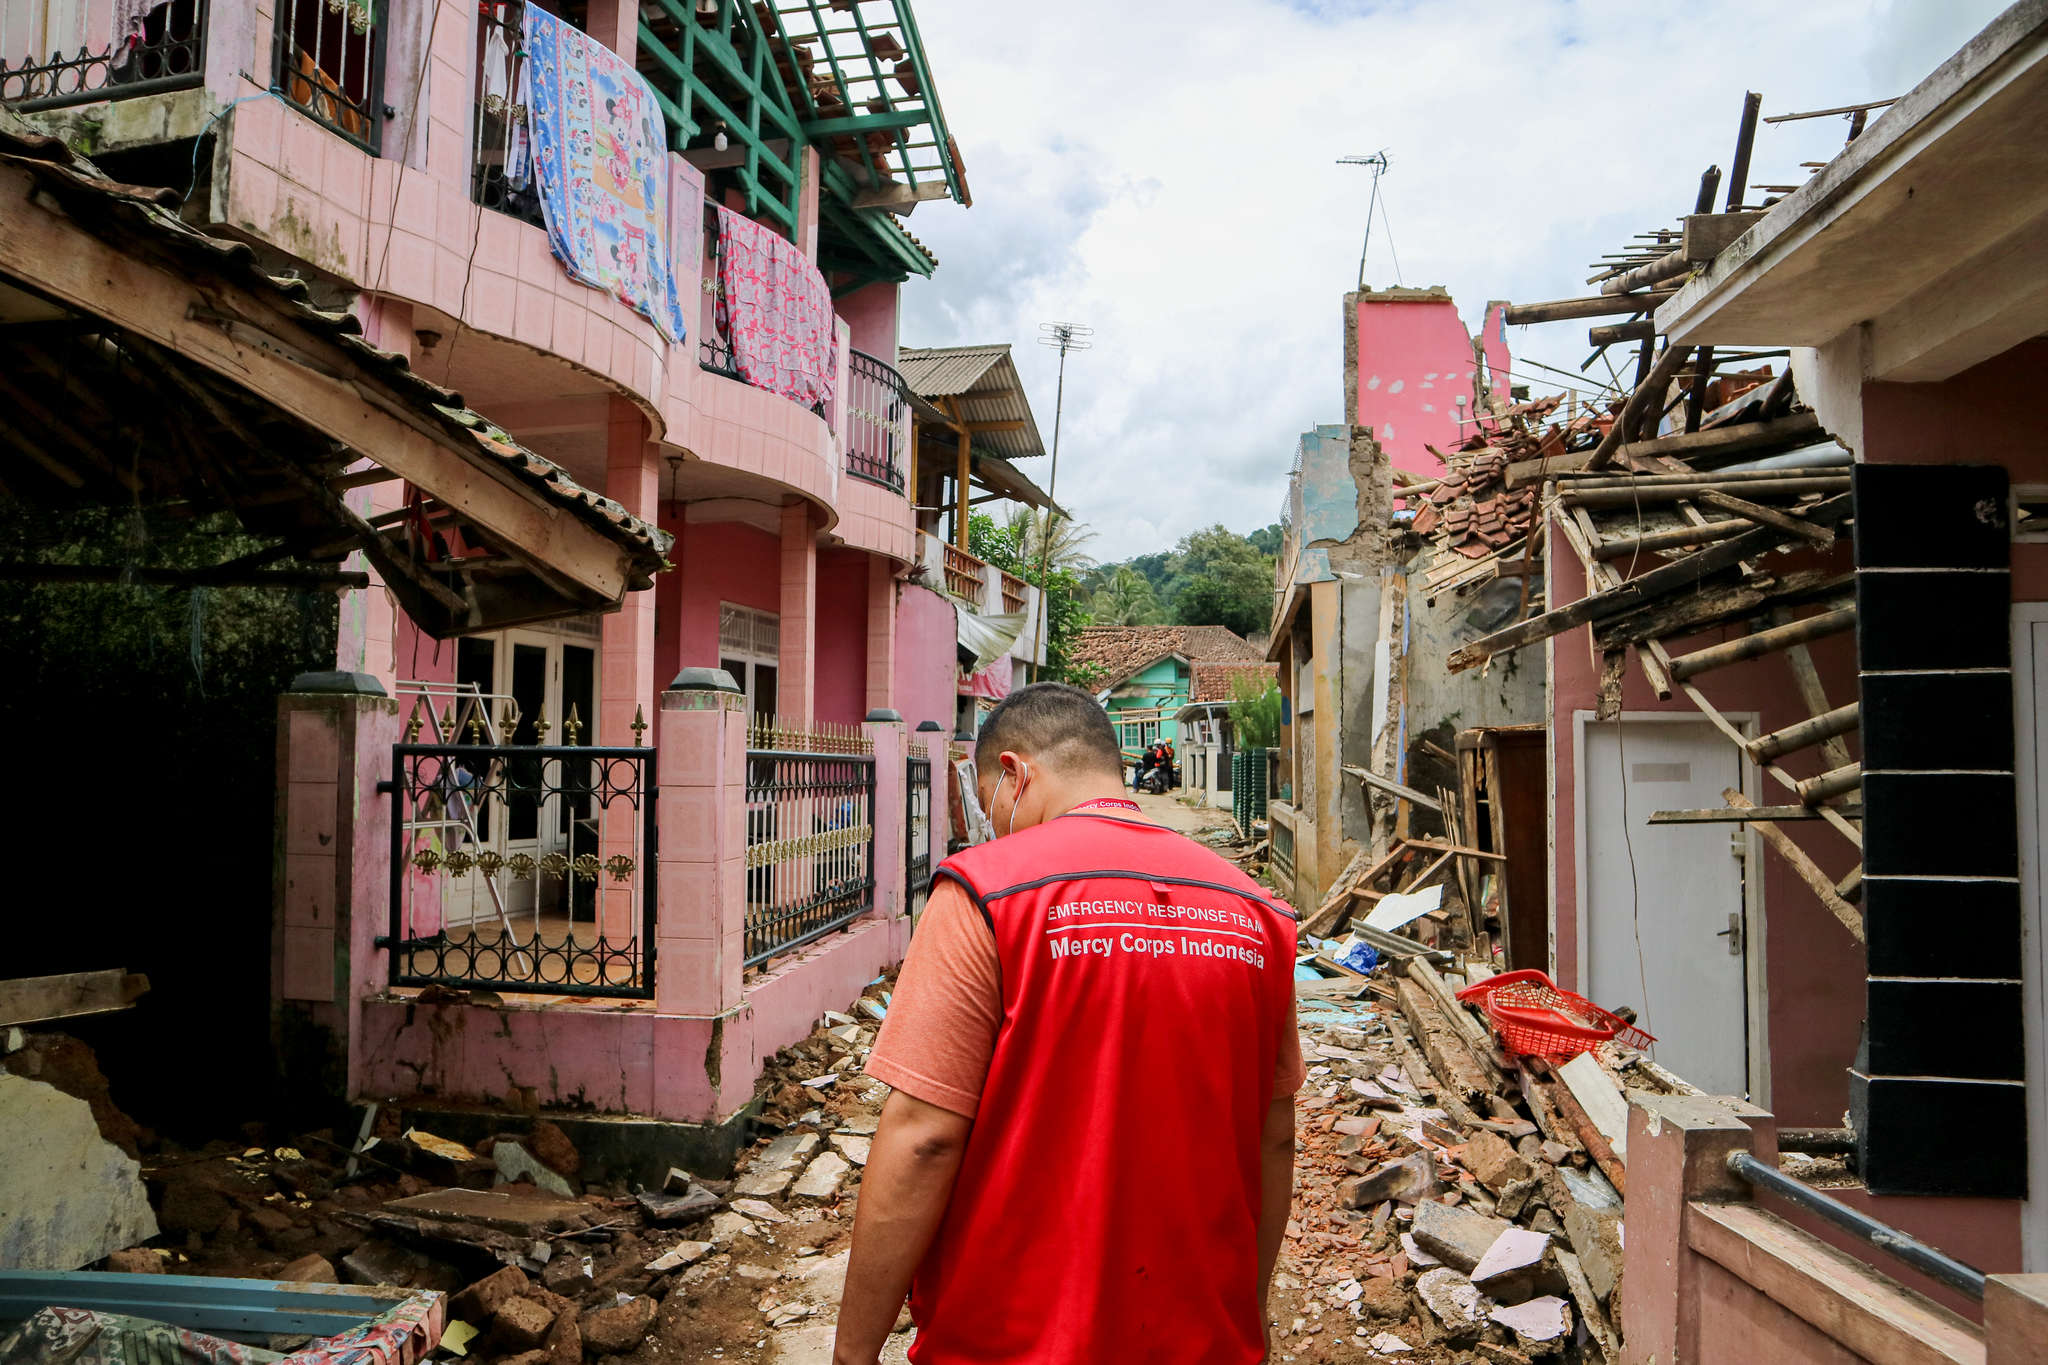 A mercy corps indonesia response team member conducting needs assessments in the cianjur district following the earthquake that struct west java.